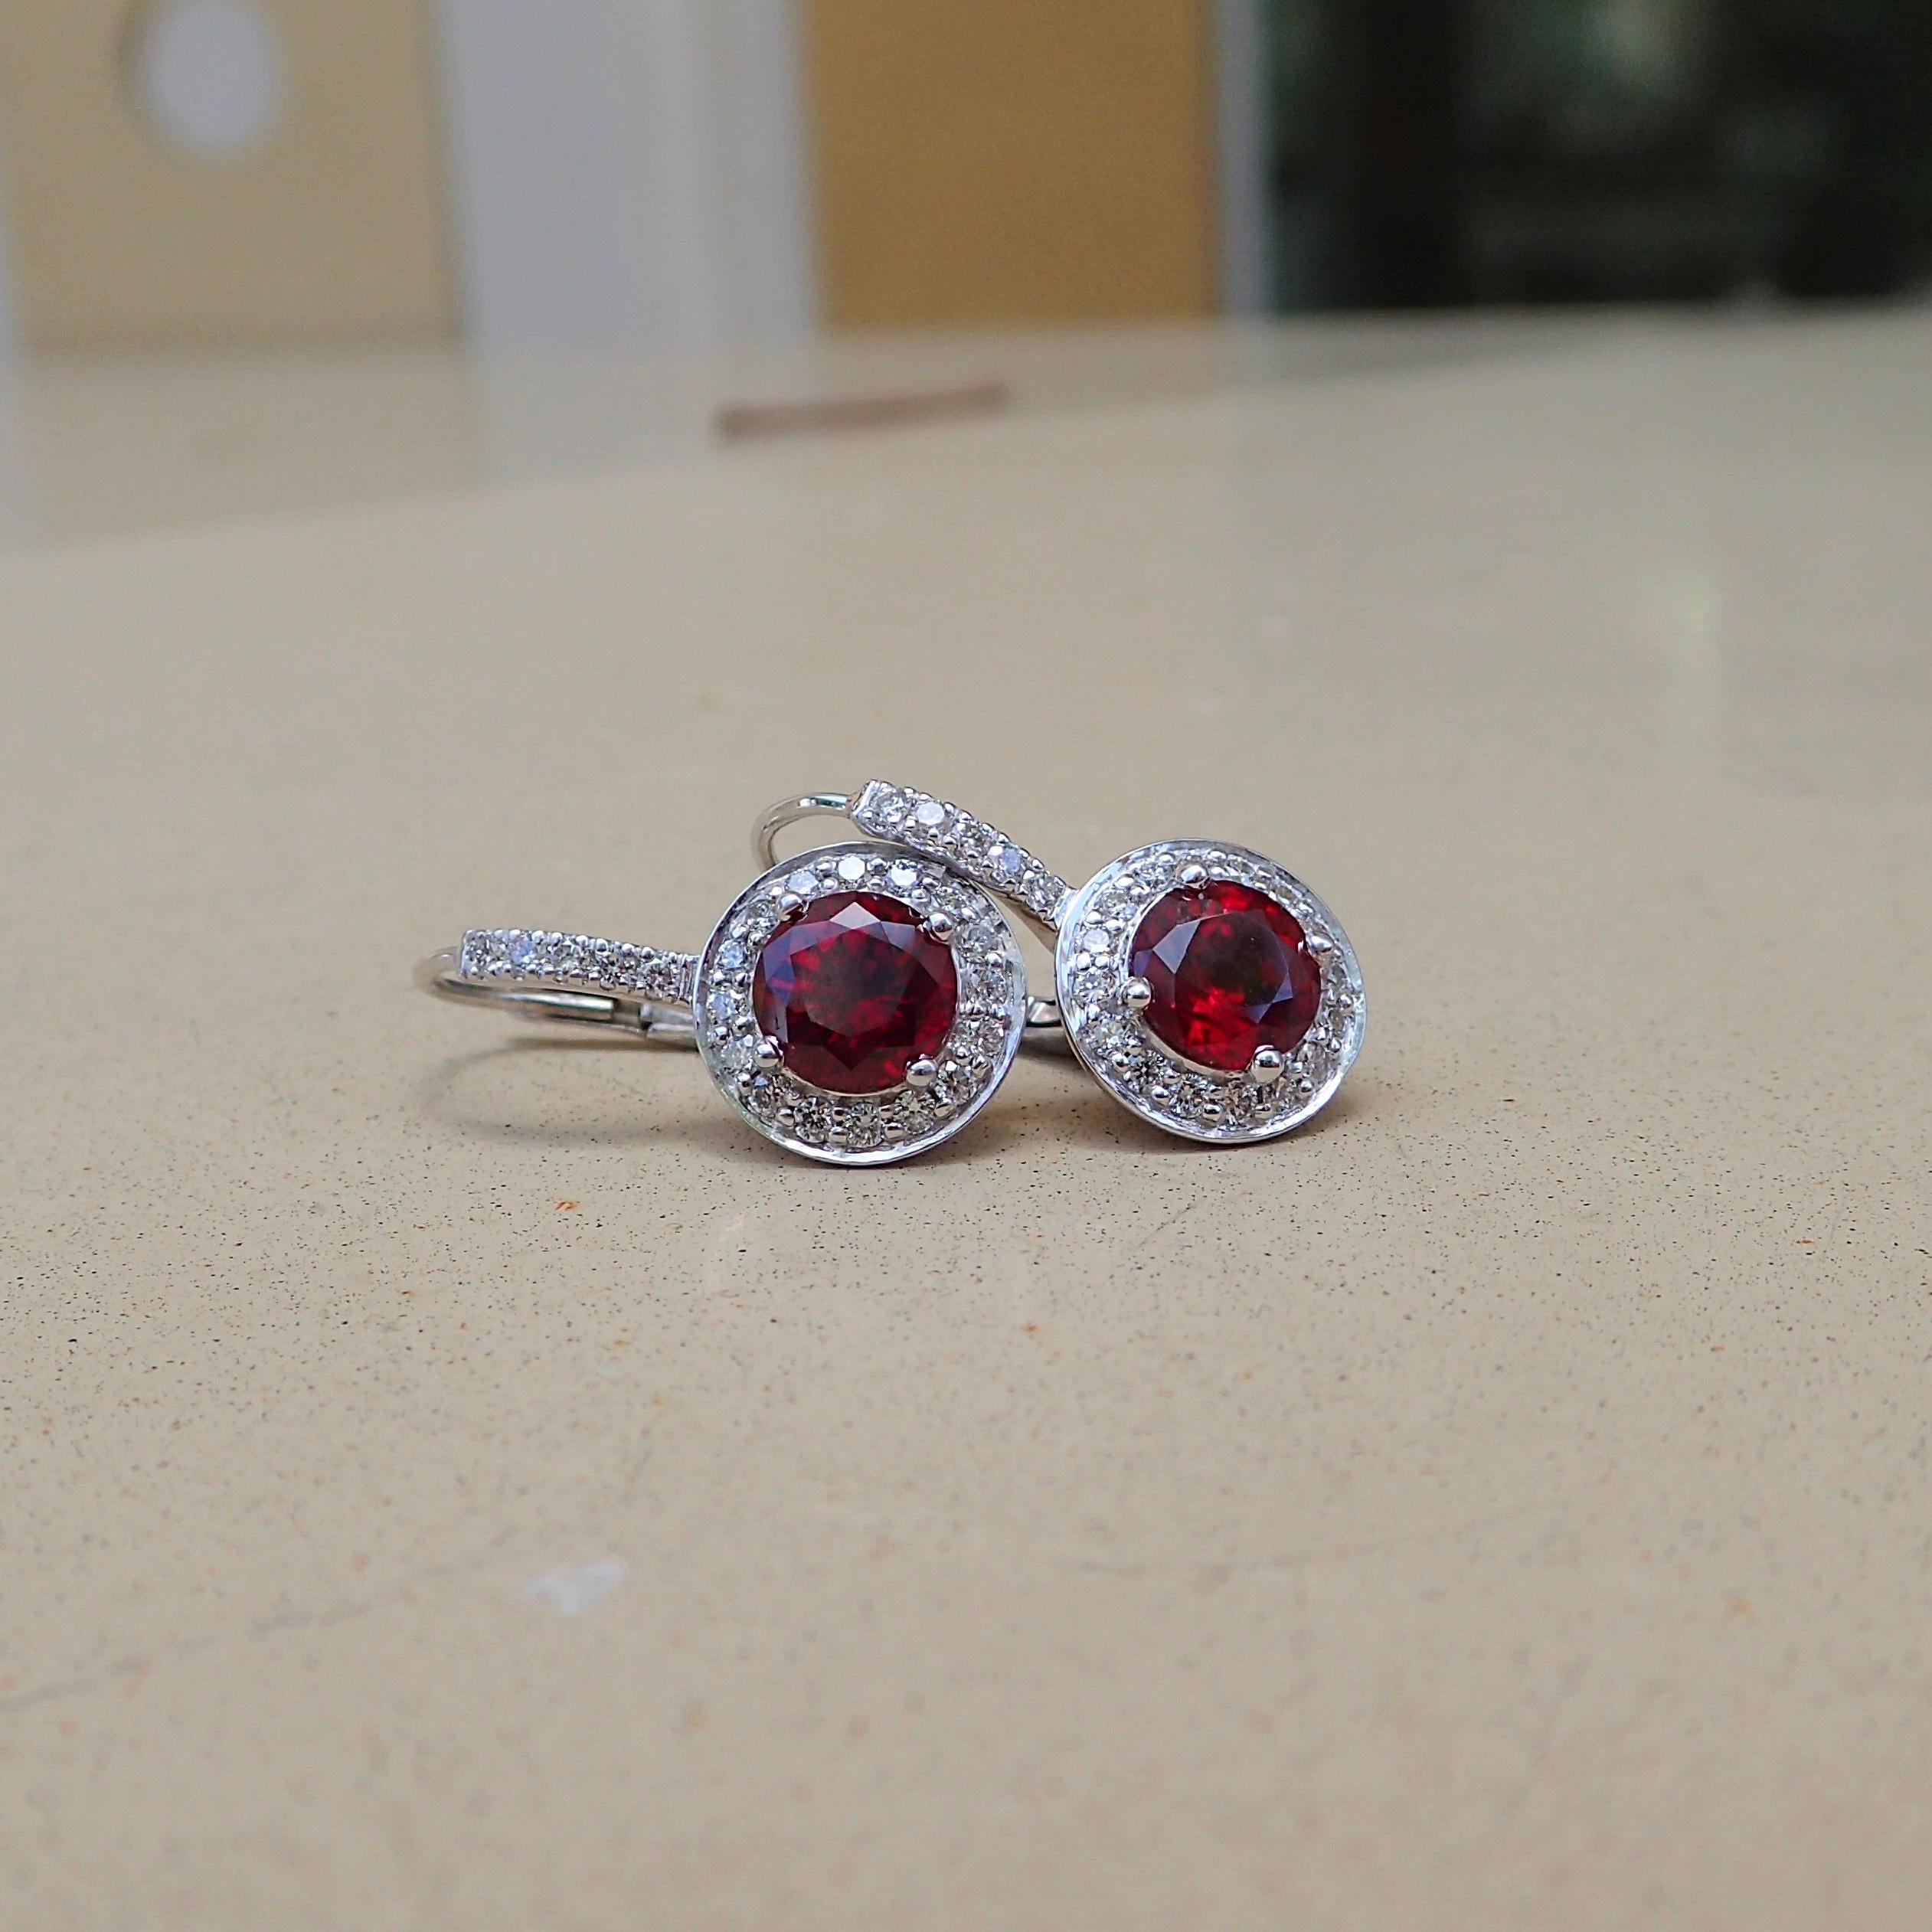 Contemporary 18k White Gold Earrings - 2.43 carats Chatham-Created Ruby & 0.41 carats Diamond